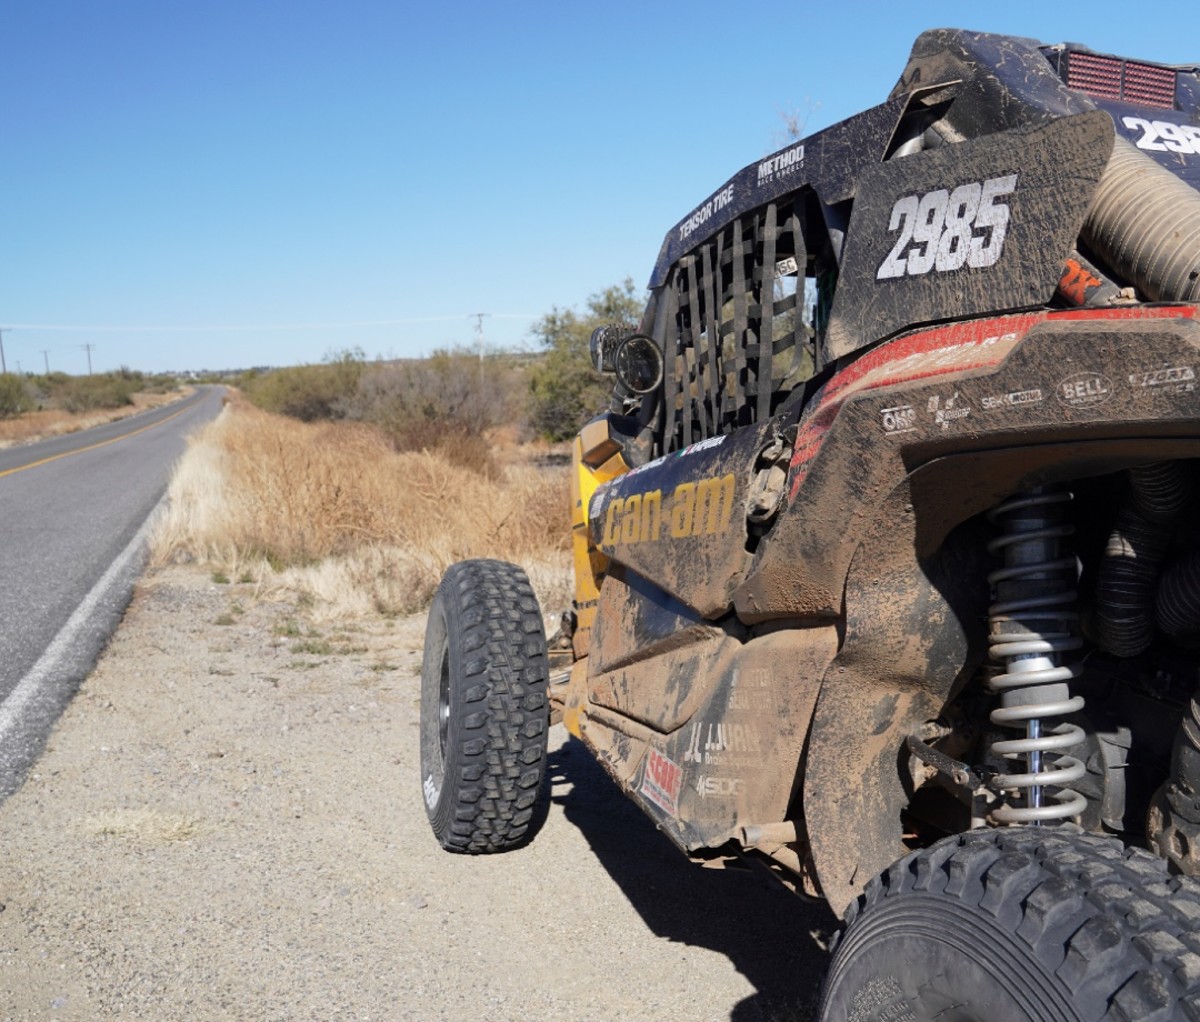 A racing UTV sits by the roadside in the desert.